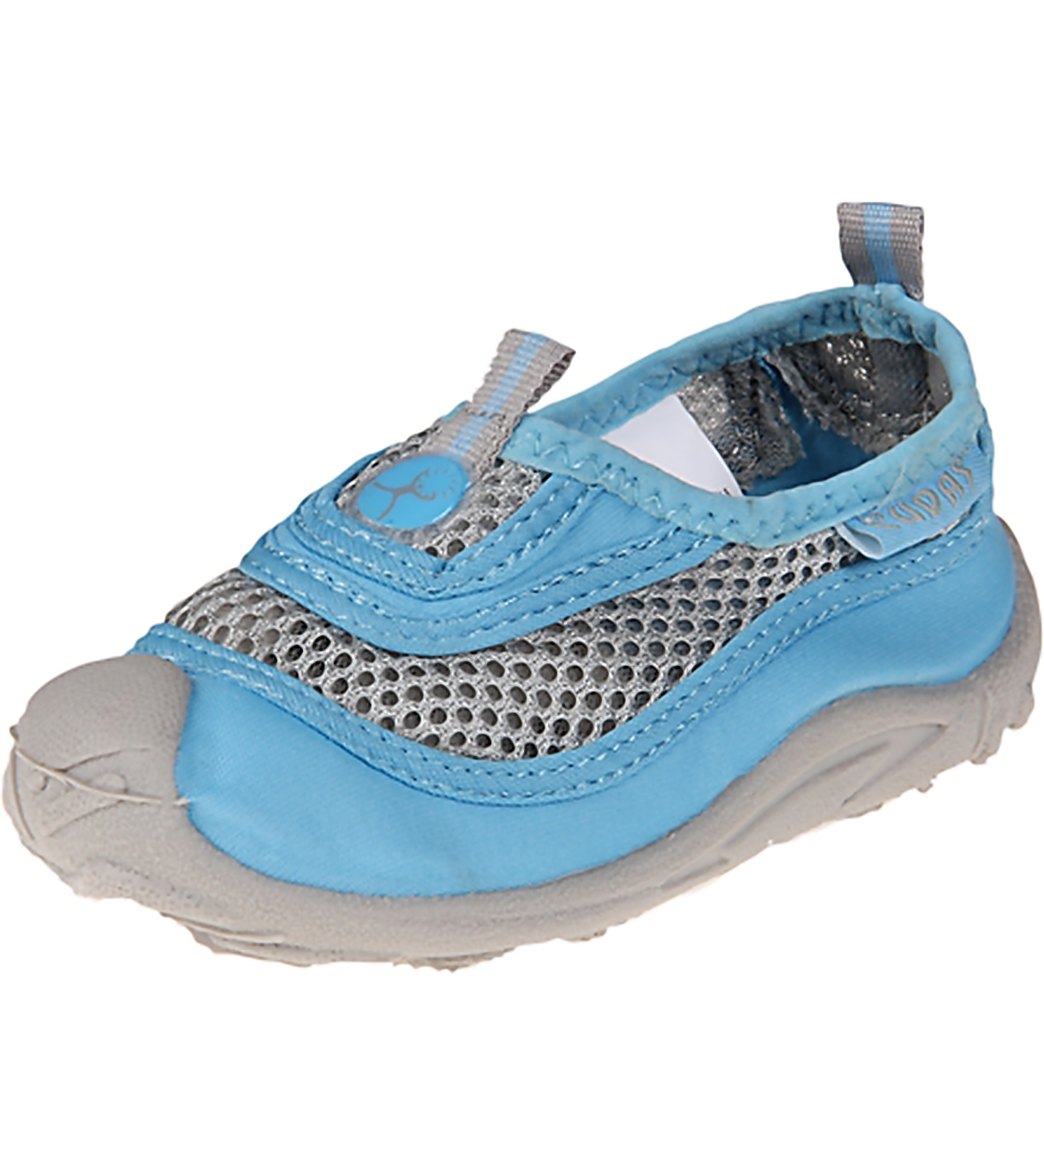 Cudas Youth Flatwater Watershoes- Light Blue - 1 - Swimoutlet.com